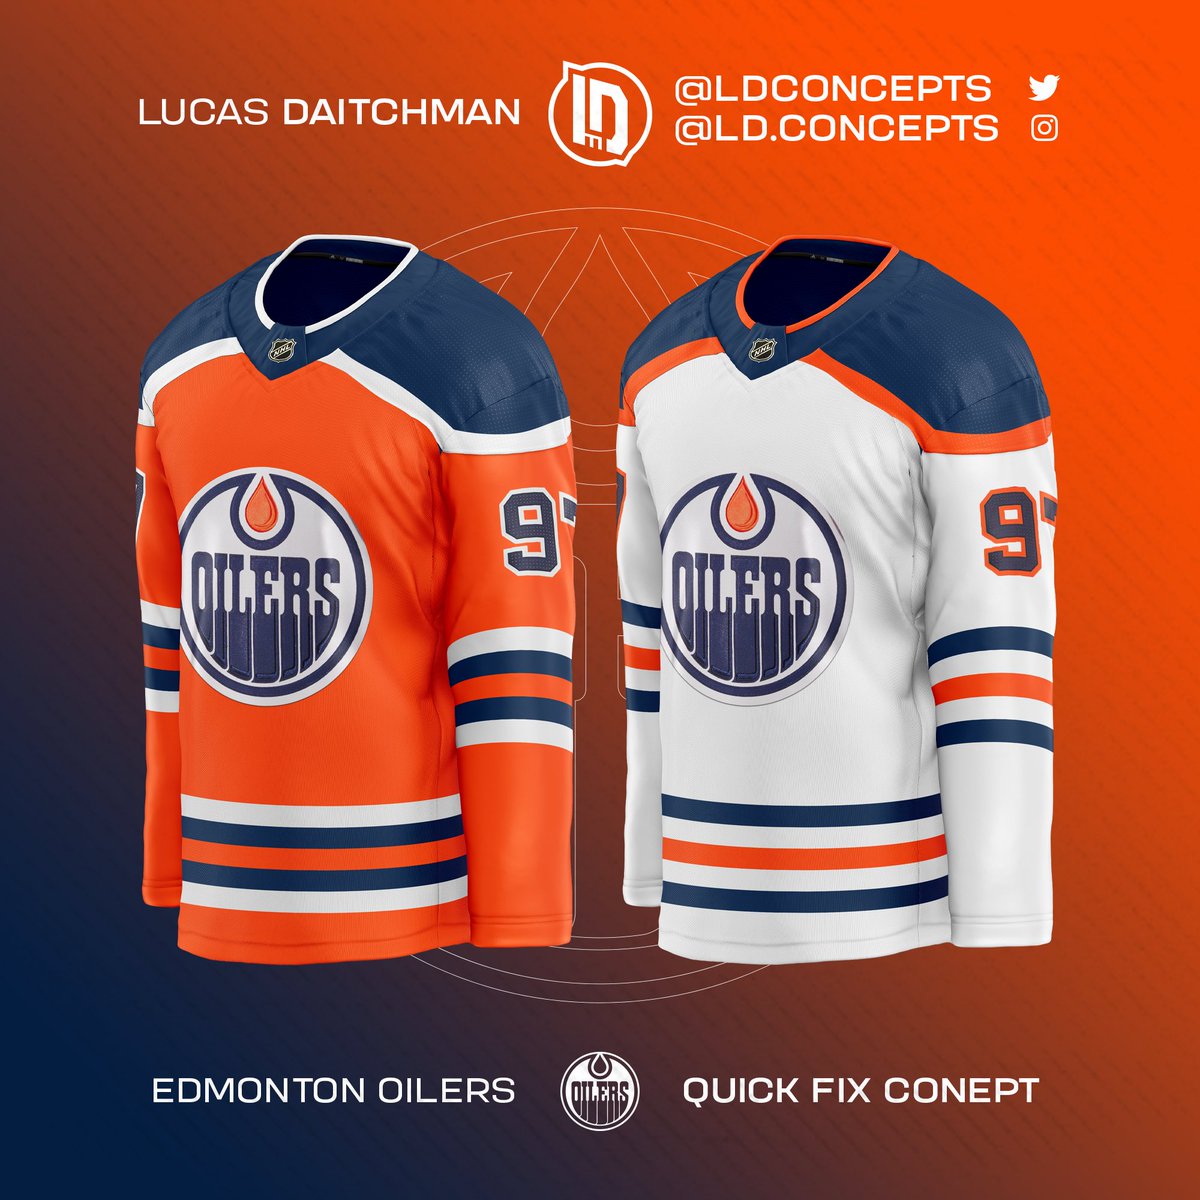 Lucas Daitchman on X: Third jersey ideas for every NHL team